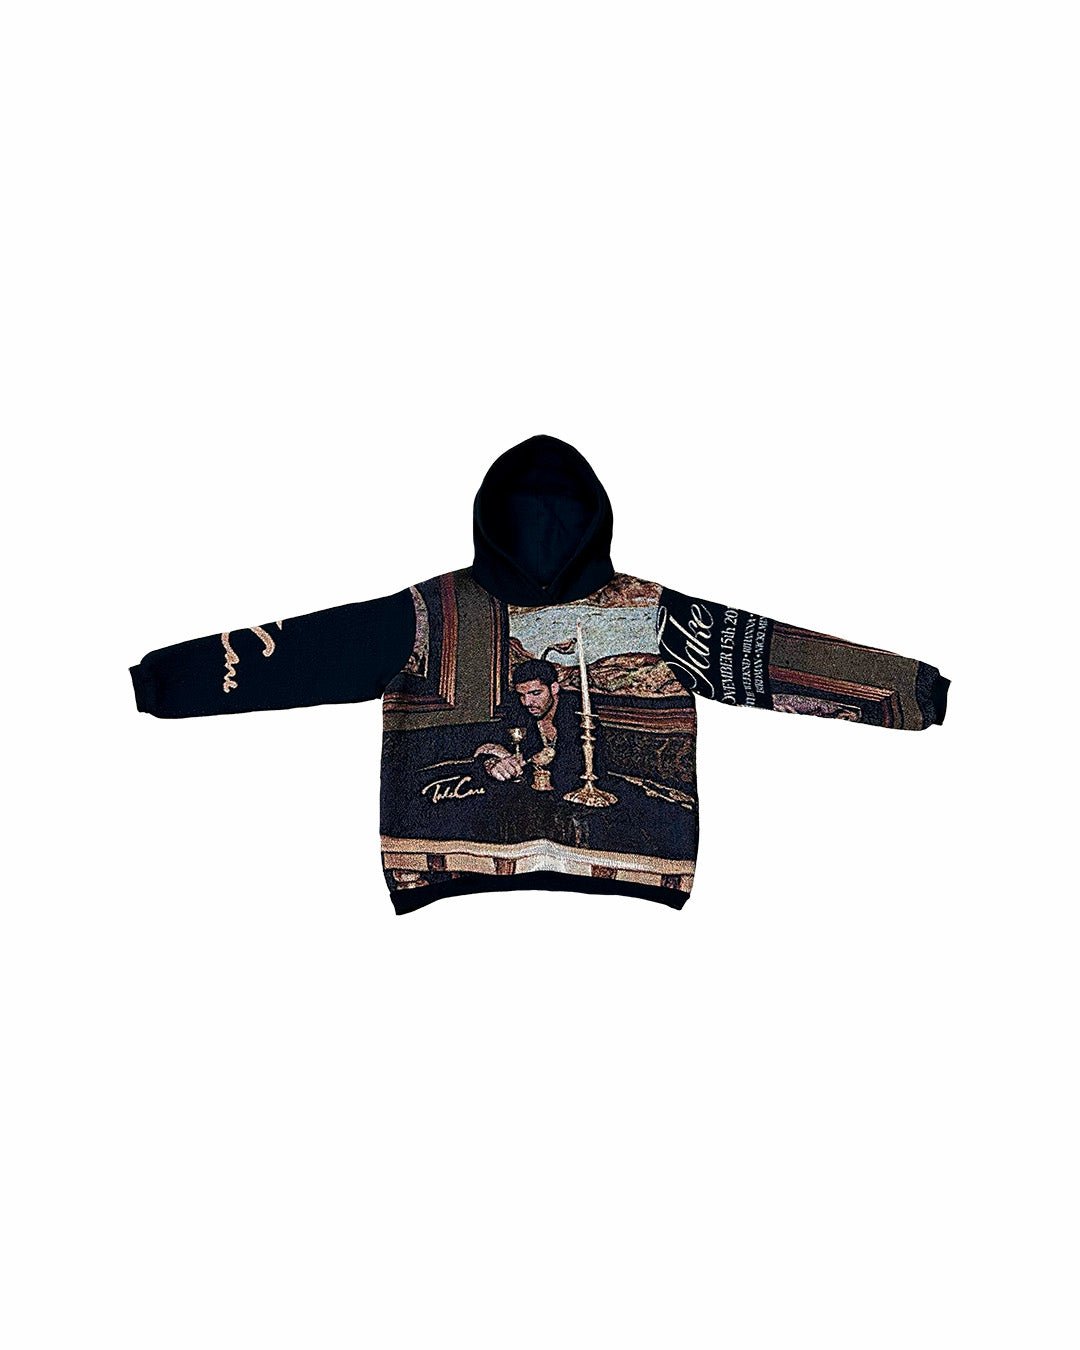 TAKE CARE TAPESTRY HOODIE